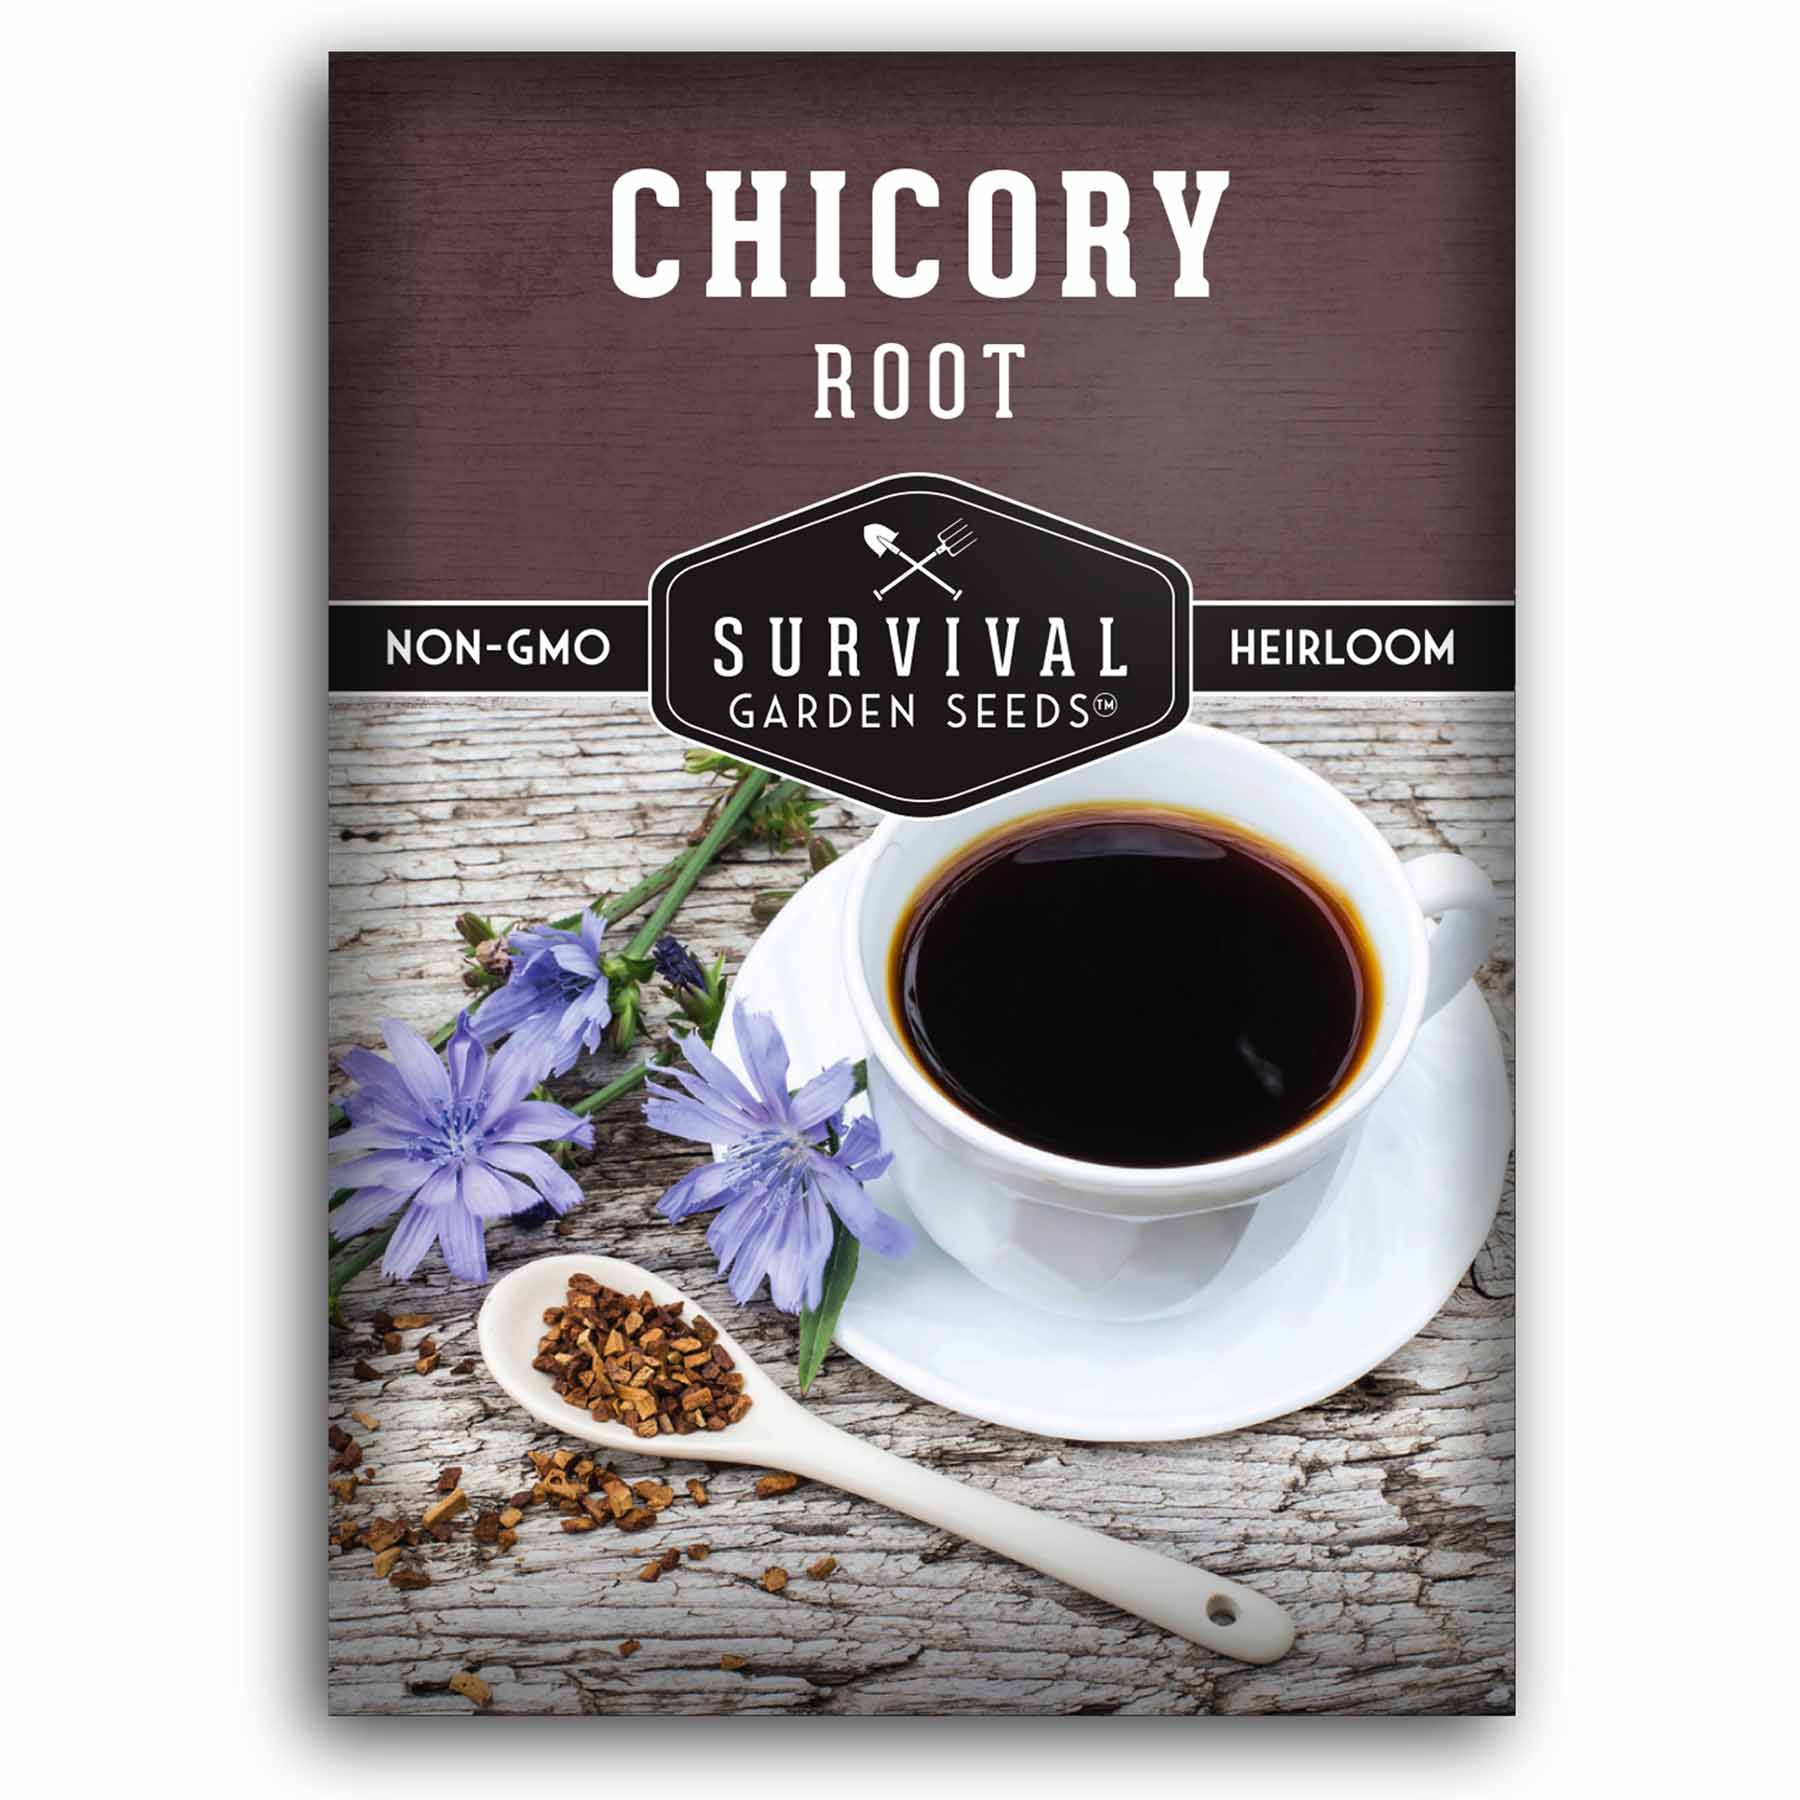 Root Chicory Seeds